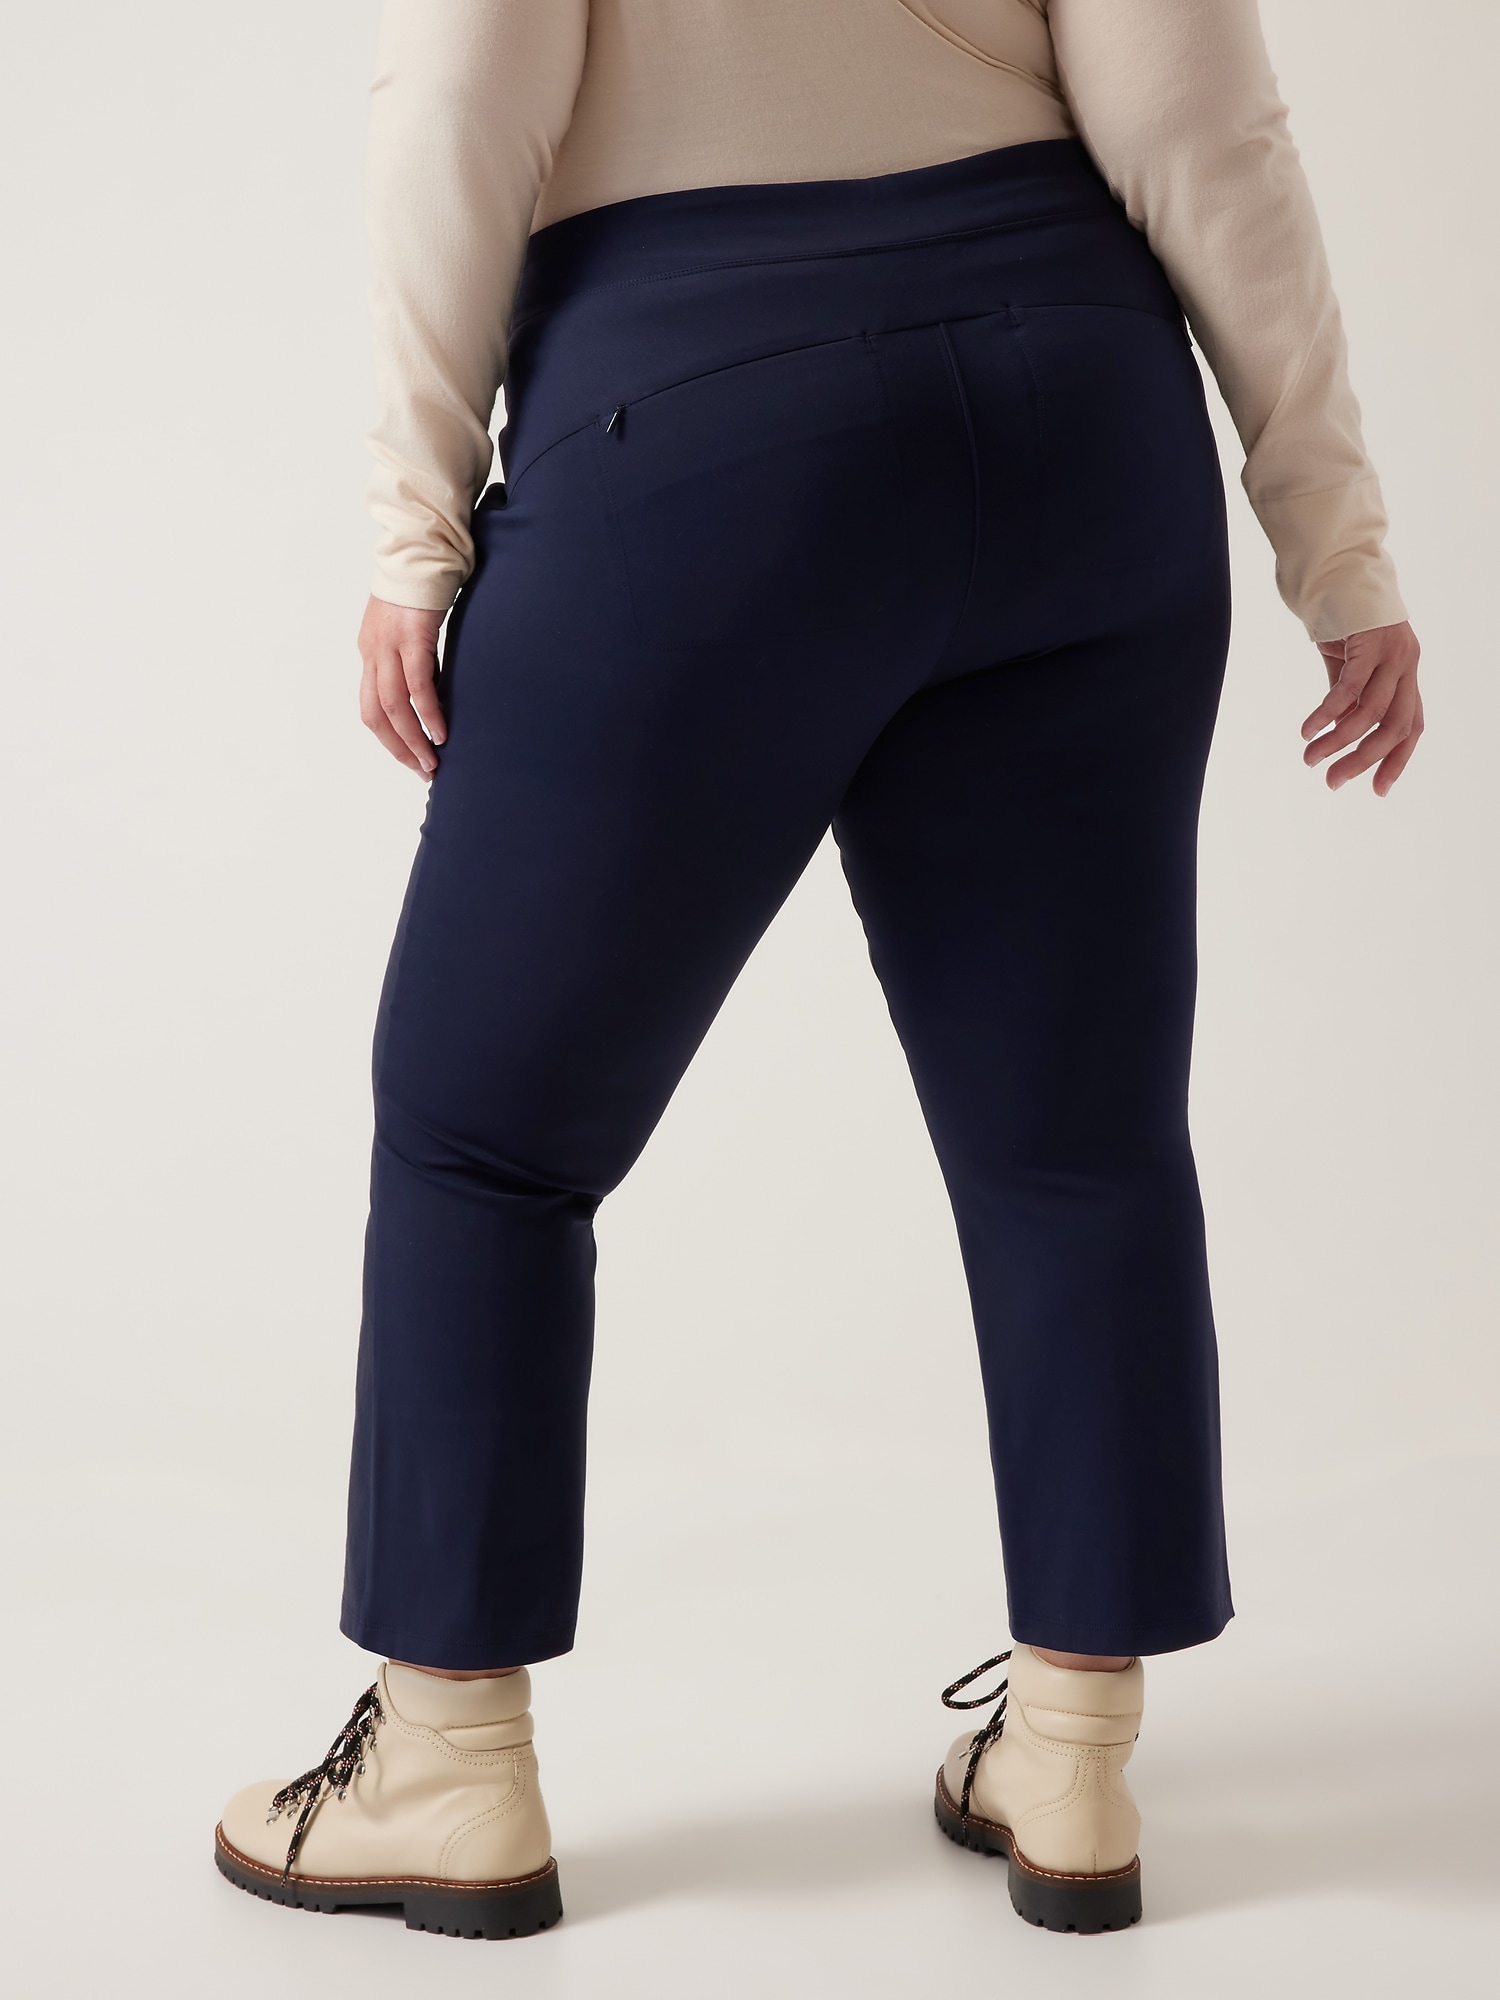 Athleta Brooklyn Ankle Pant Review: They Live up to the Hype